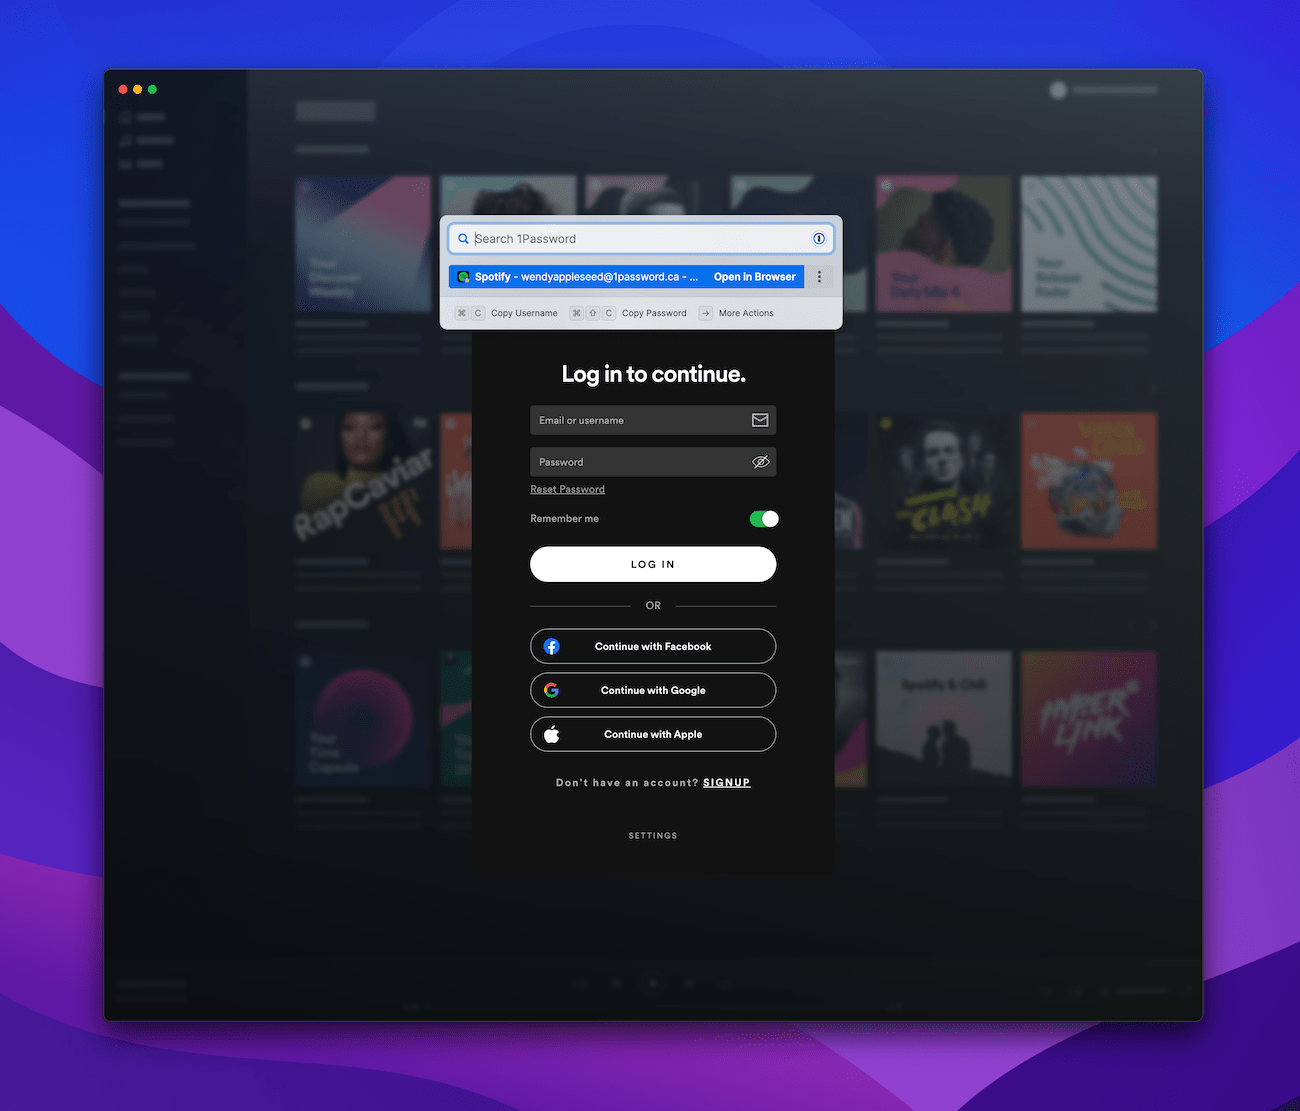 1Password for Mac Quick Access with a Spotify login item highlighted, despite there being no text in the search field, indicating that Quick Access automatically found the relevant login item with no input. Spotify for Mac is open in the background.